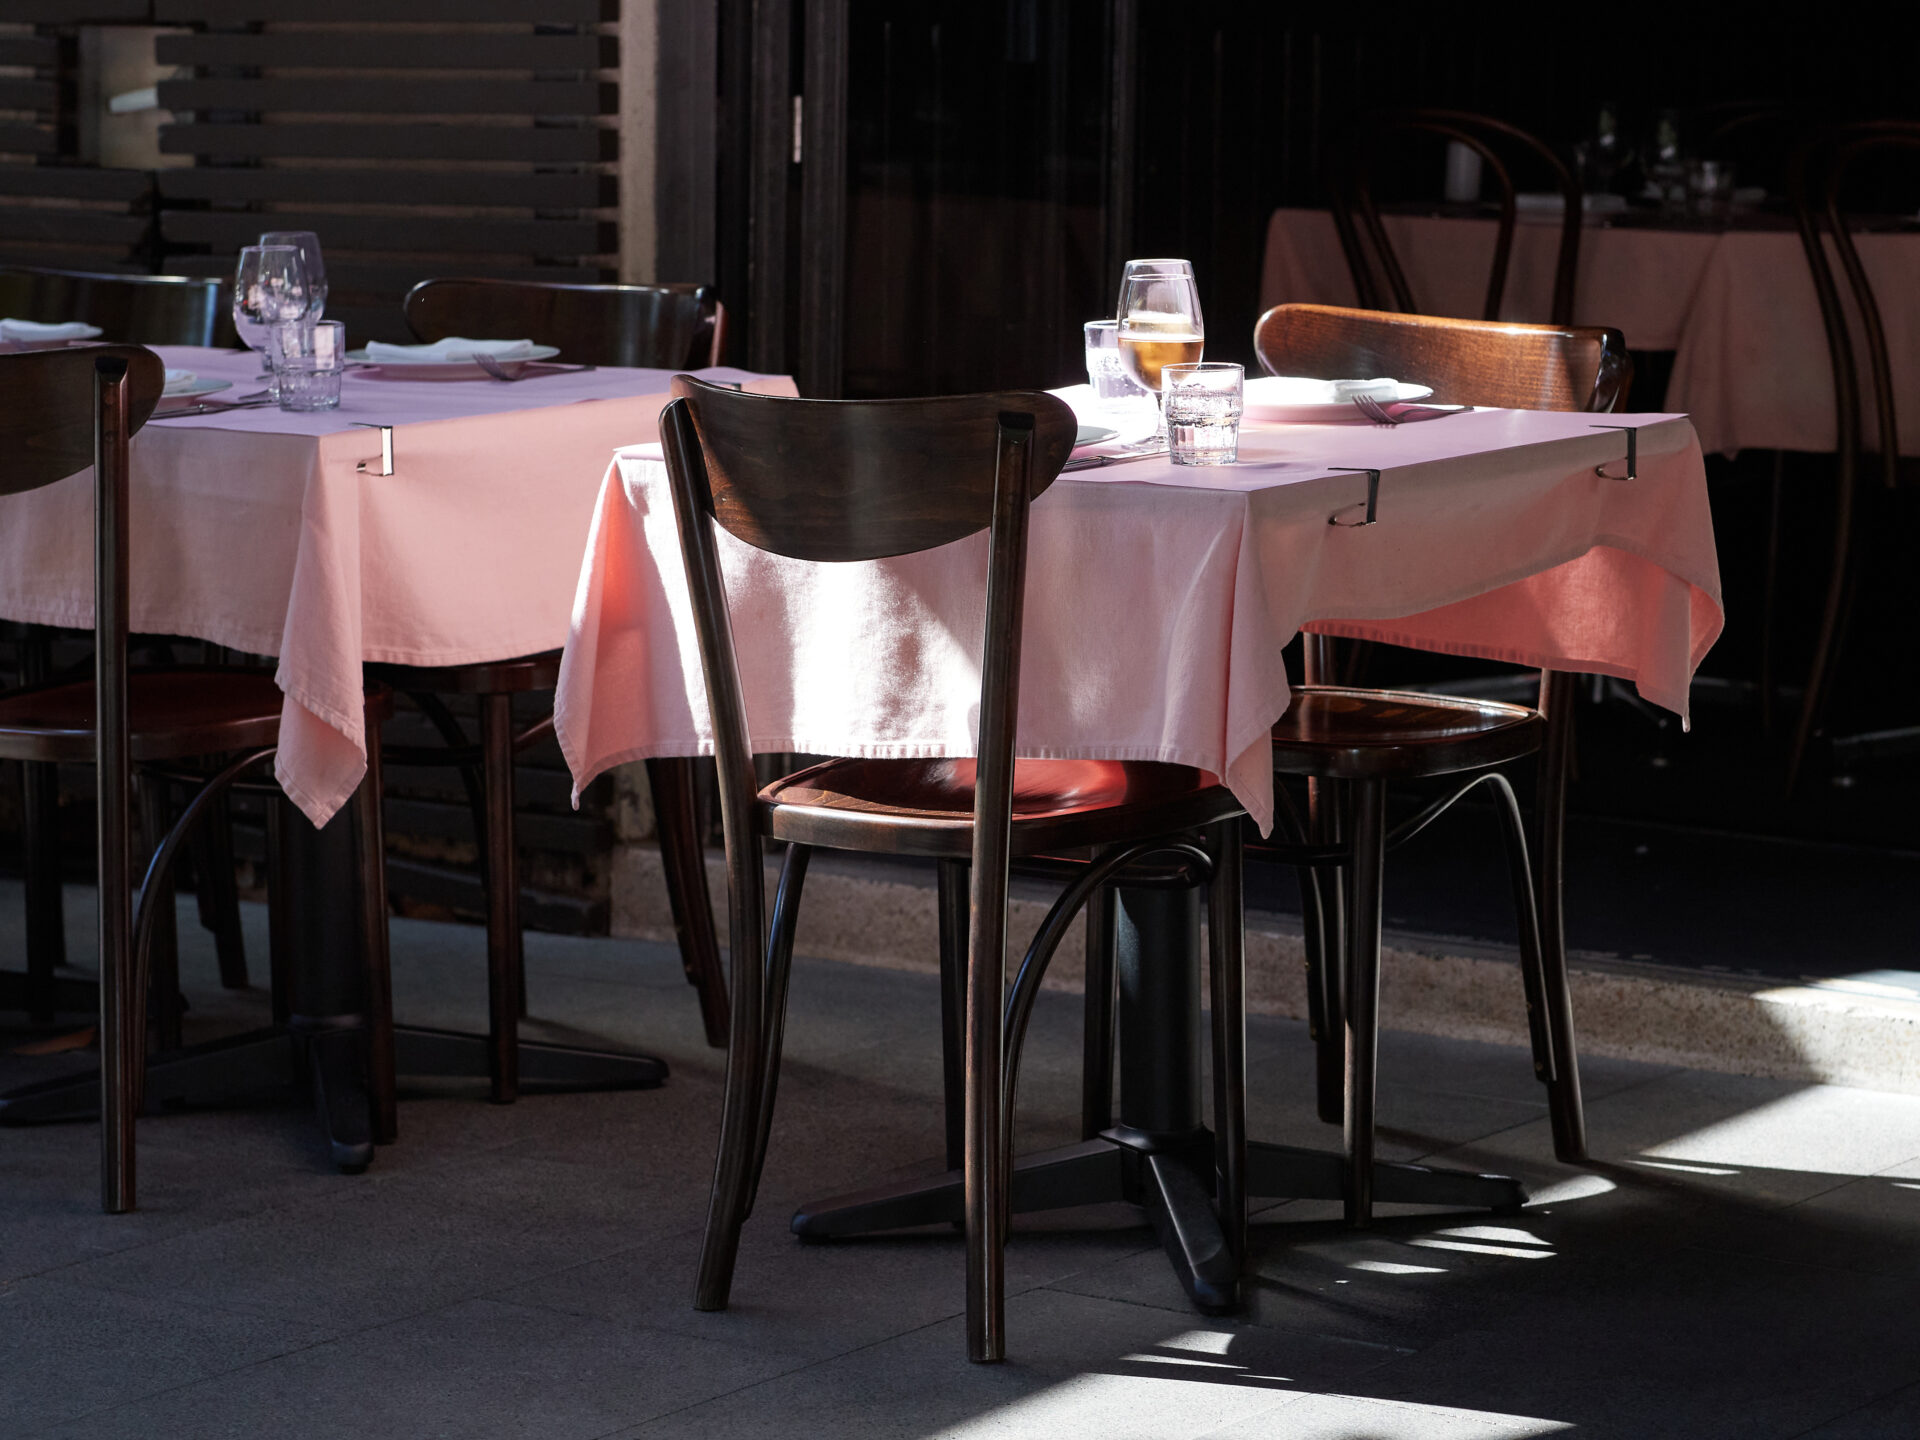 Bistrot 916 featuring NOROCK's Trail self-stabilising table bases outdoors